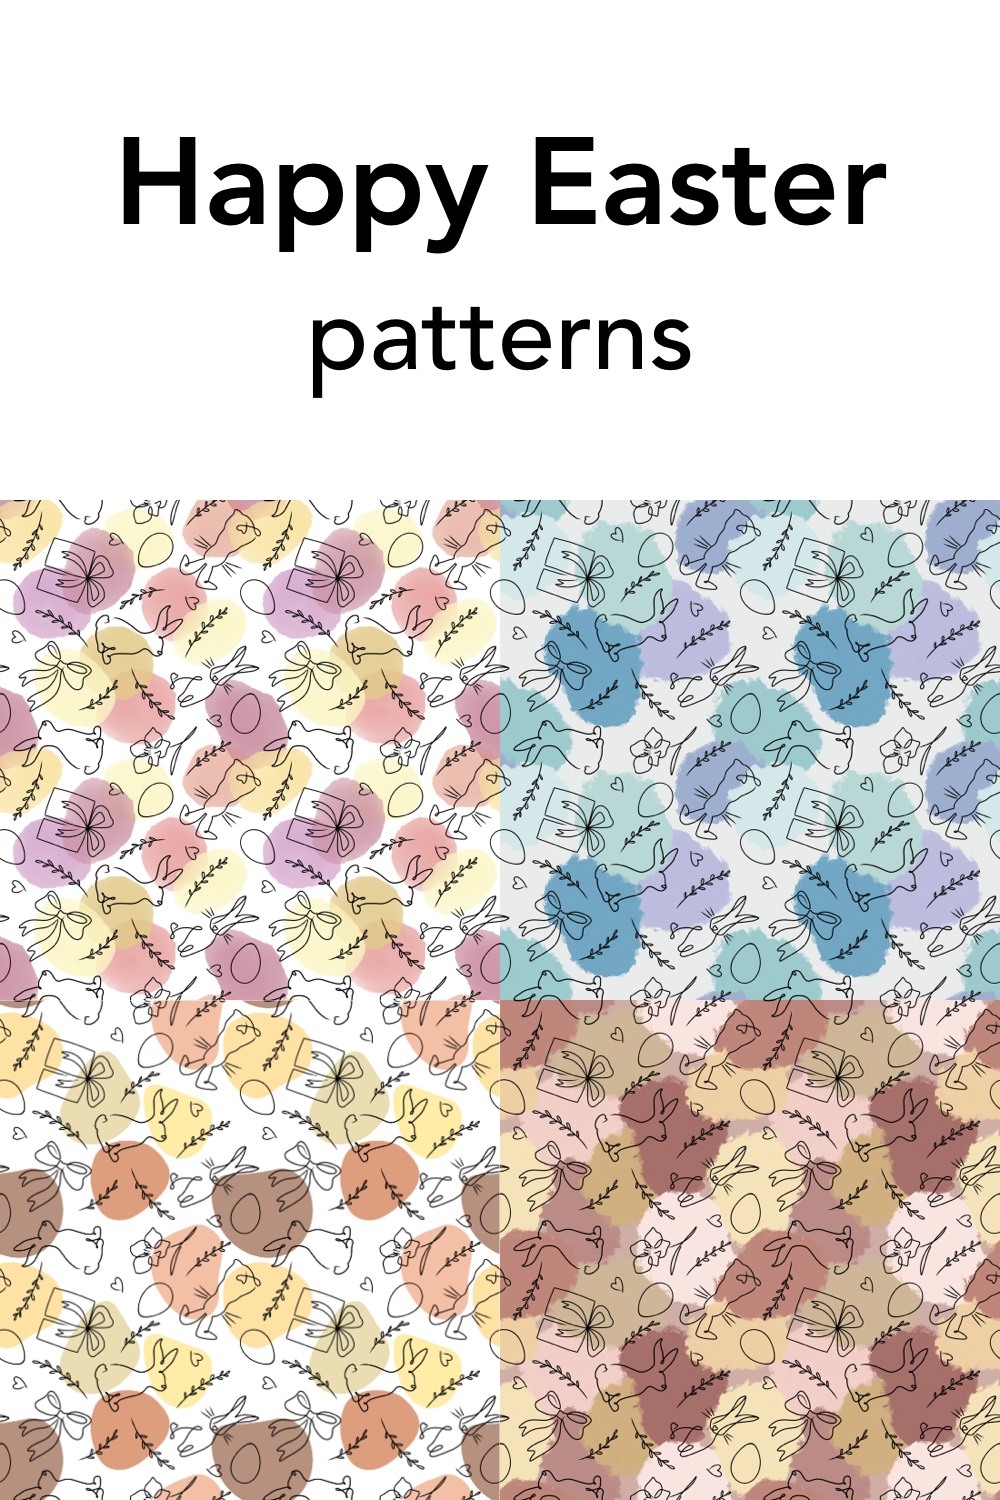 Easter patterns pinterest preview image.